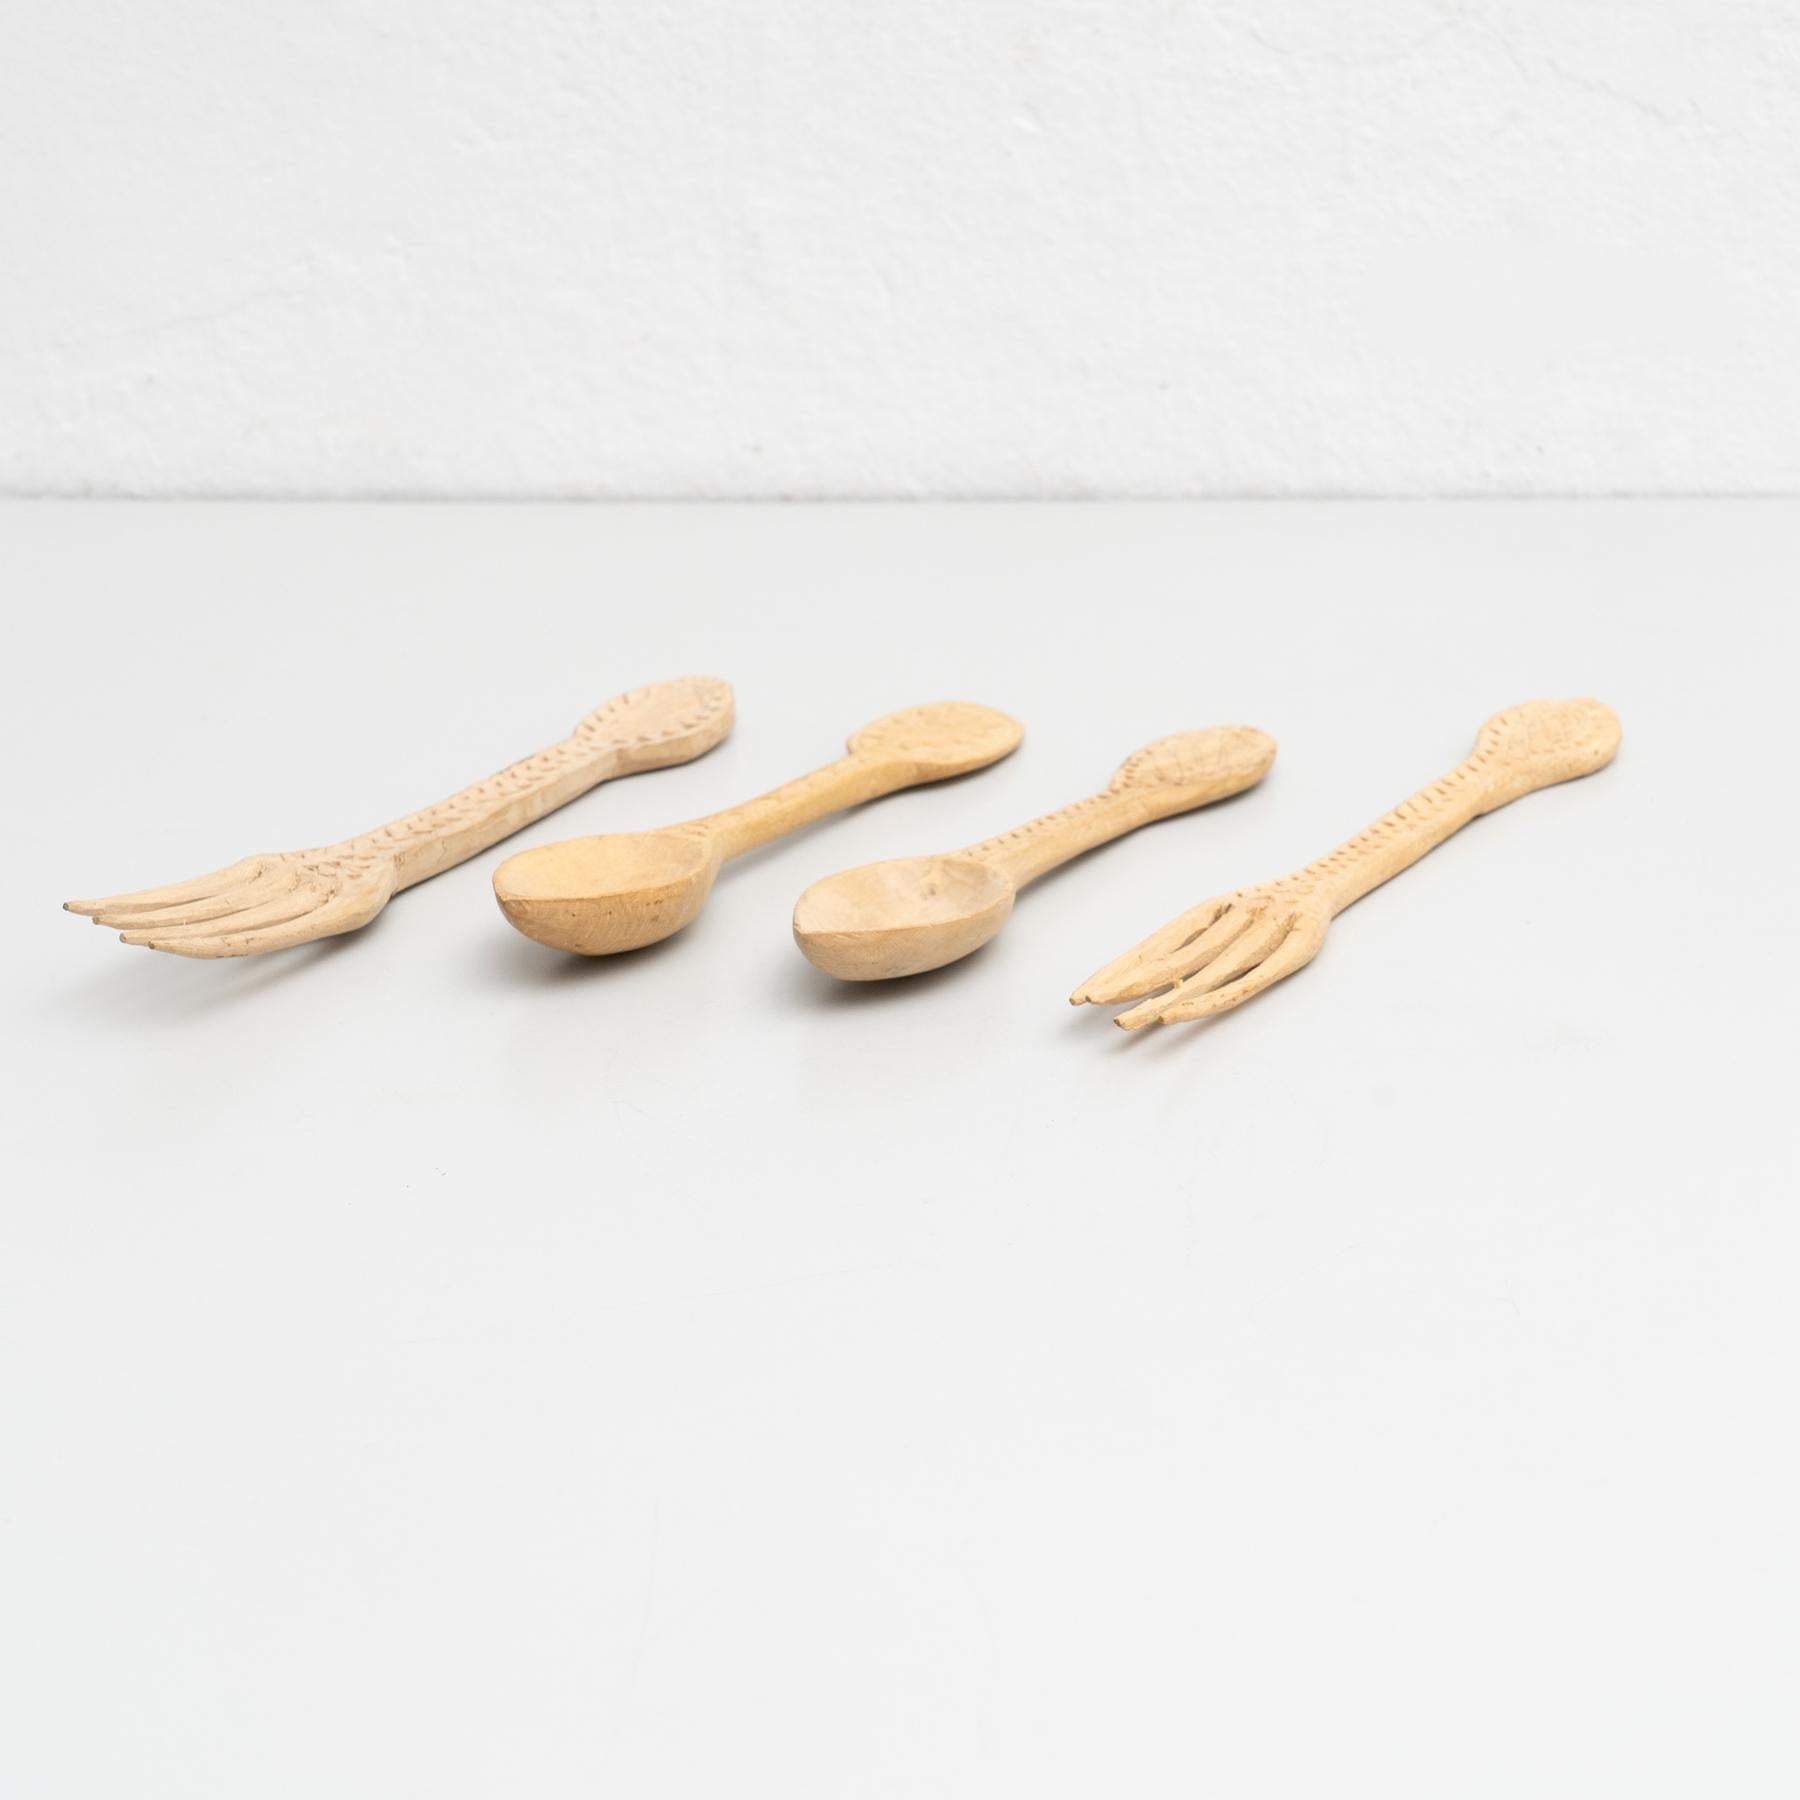 Traditional pastoral primitive set of wooden carved fork and spoons.

Handmade in Spain, circa 1900.

In original condition, with minor wear consistent with age and use, preserving a beautiful patina.

Materials:
Wood.

Dimensions:
Forks: